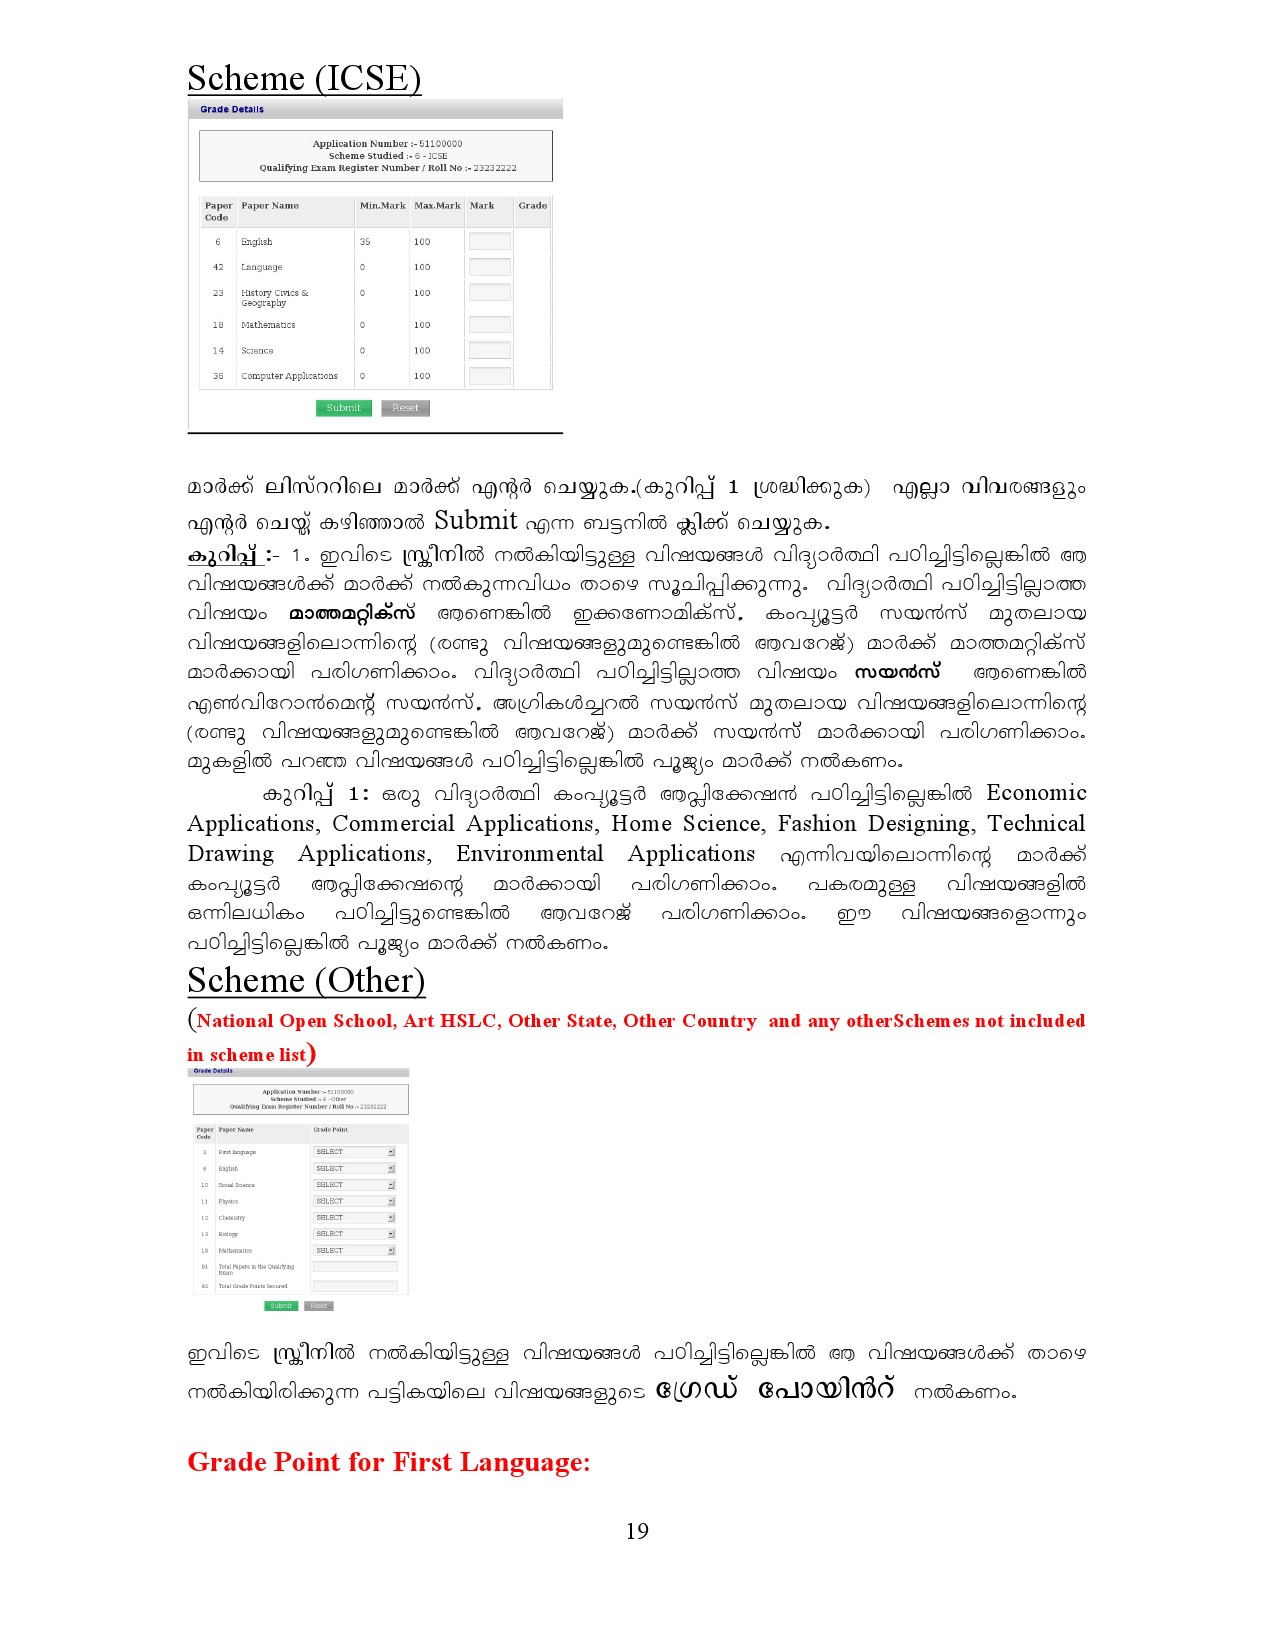 Higher Secondary School Online Application Manual in Malayalam - Notification Image 19